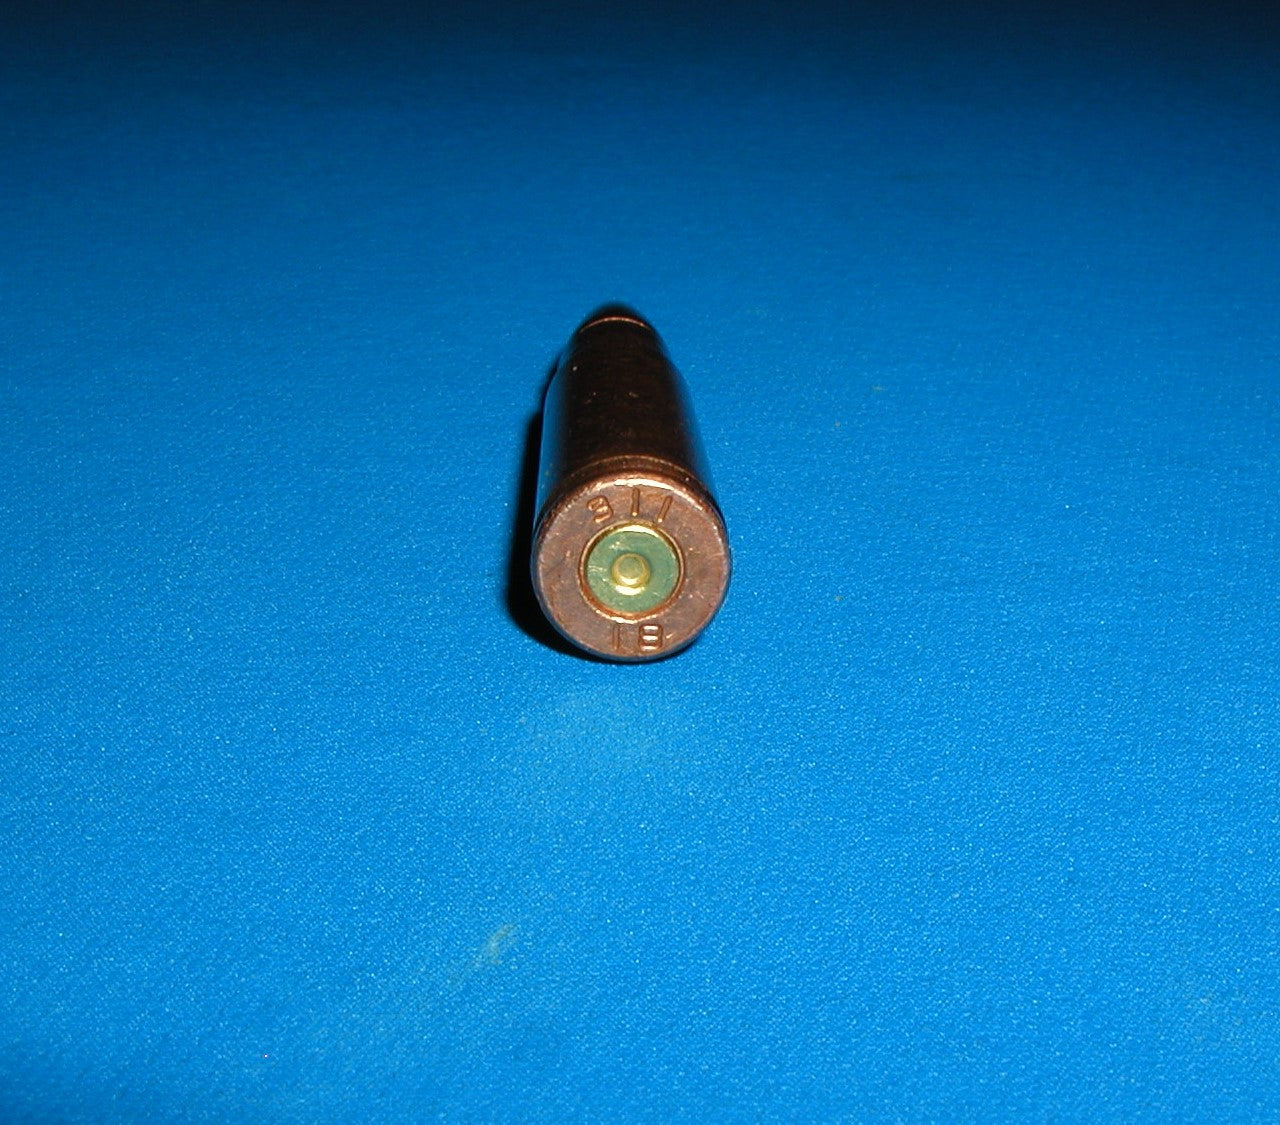 7.62 x 39 (AK-47) Steel casing, Copper color with a Full Metal